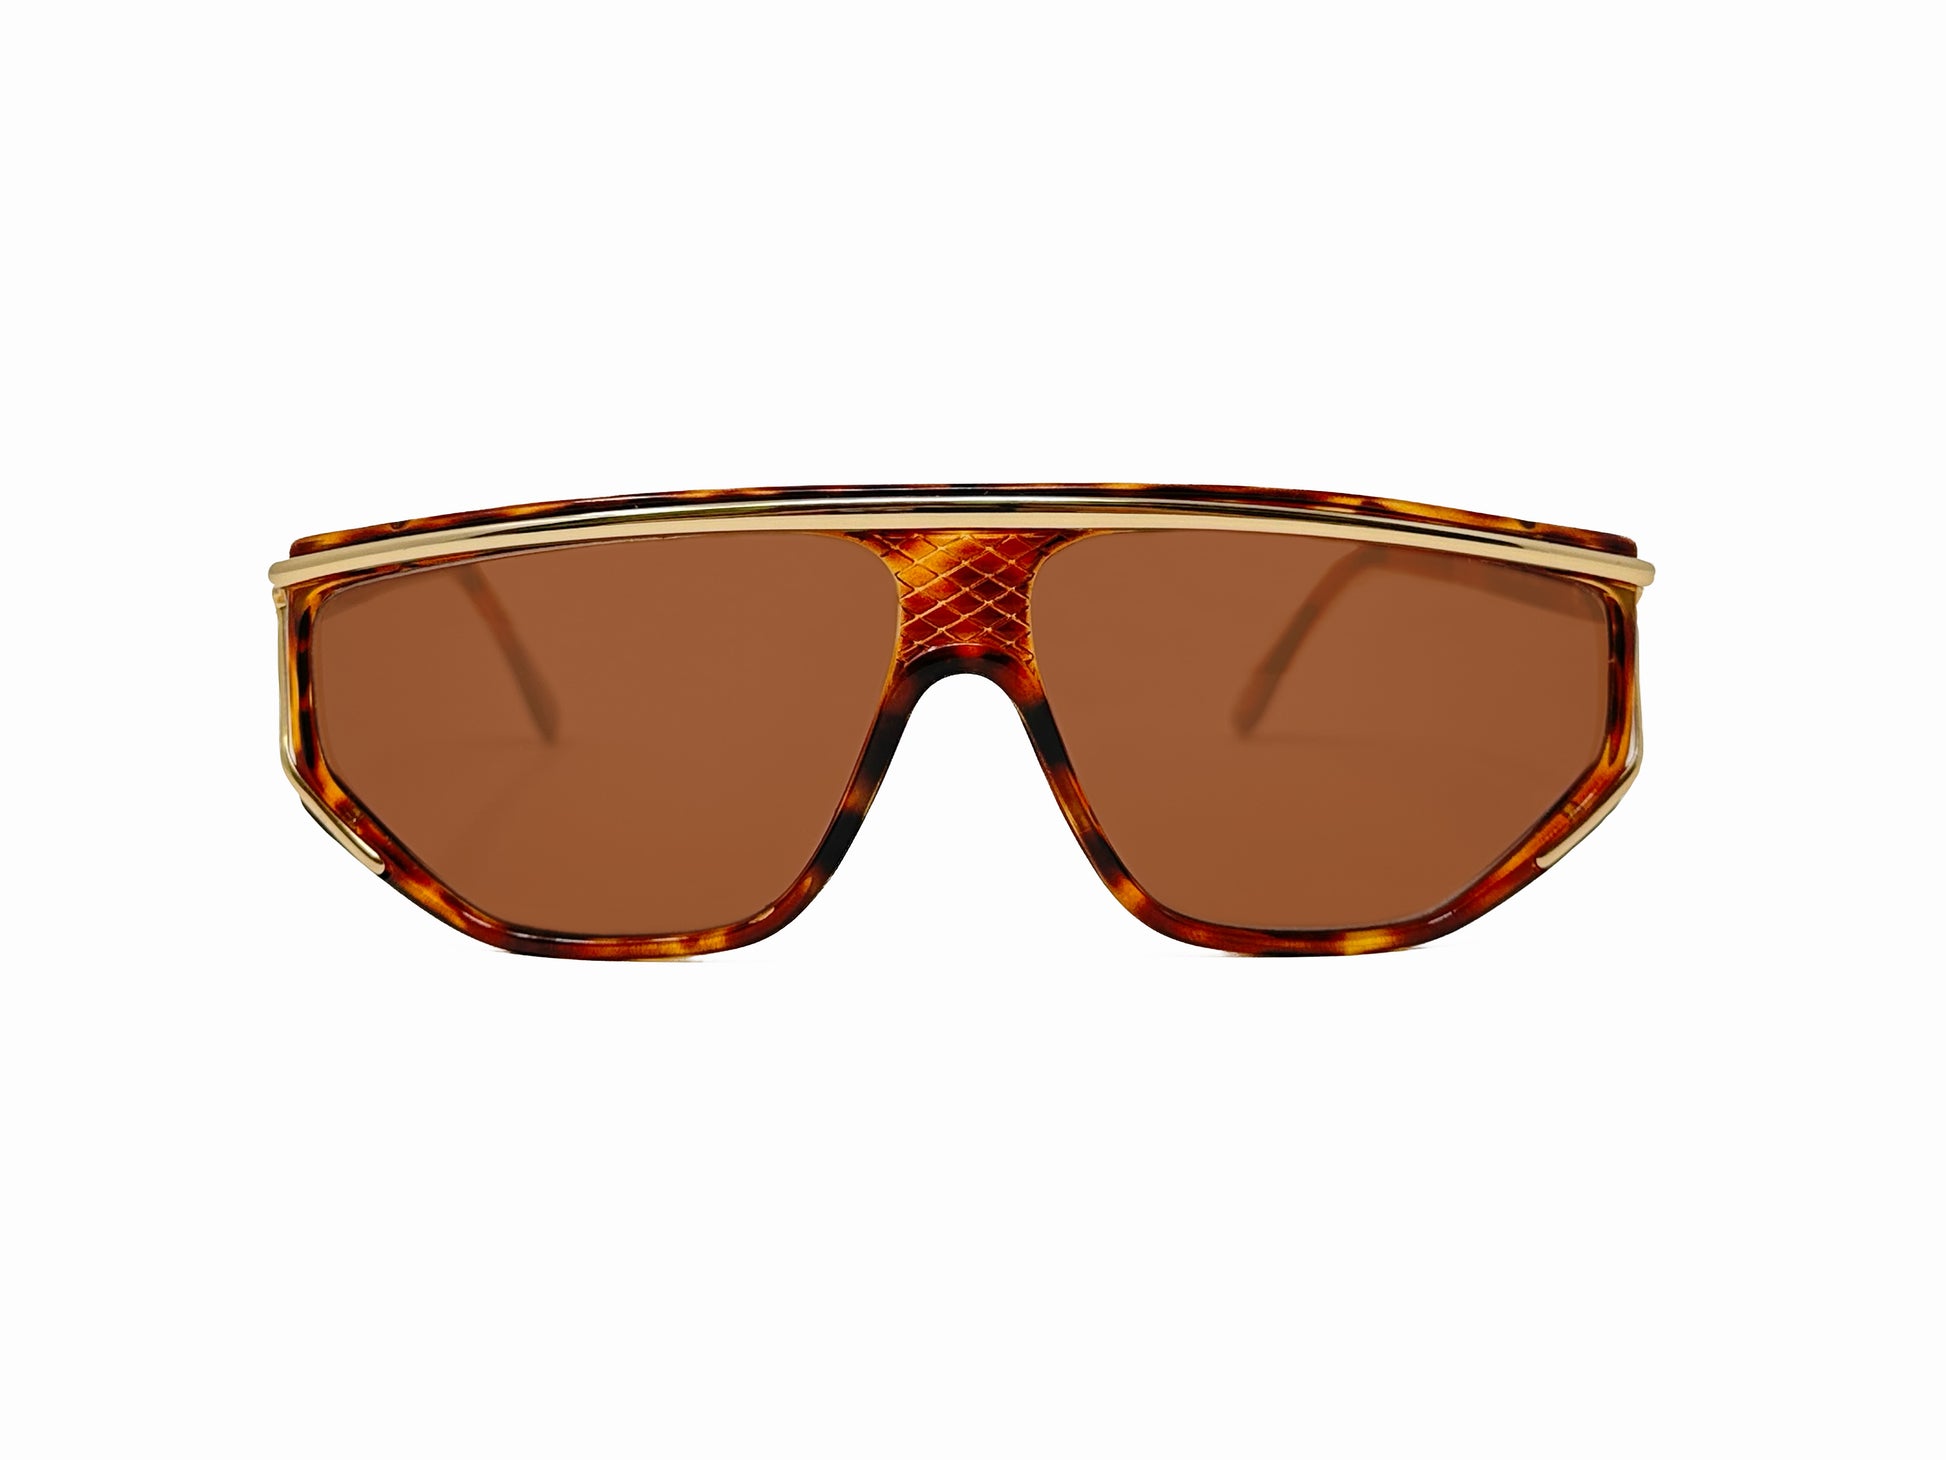 Helena Rubenstein rectangular, geometric, acetate sunglasses with a curved flattop. Model: HR201. Color: 4020 - Tortoise with gold metal accent across top of frame. Front view. 